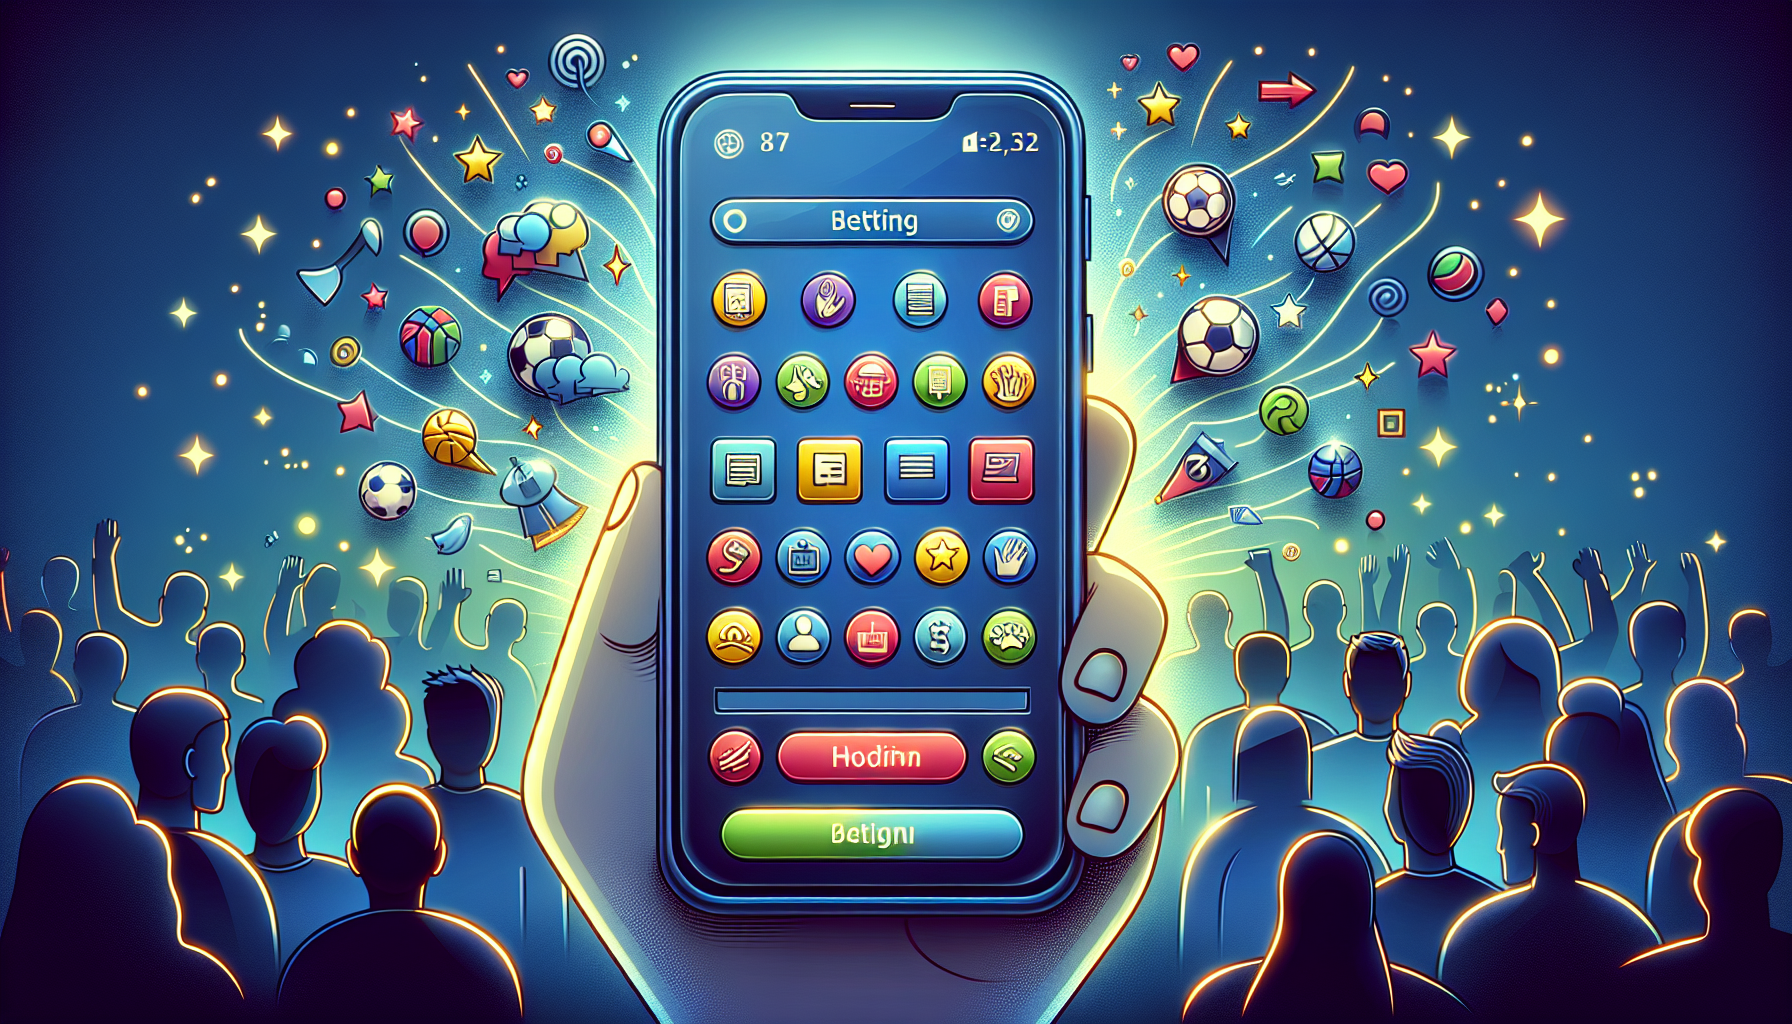 Illustration of user-friendly interface and mobile app